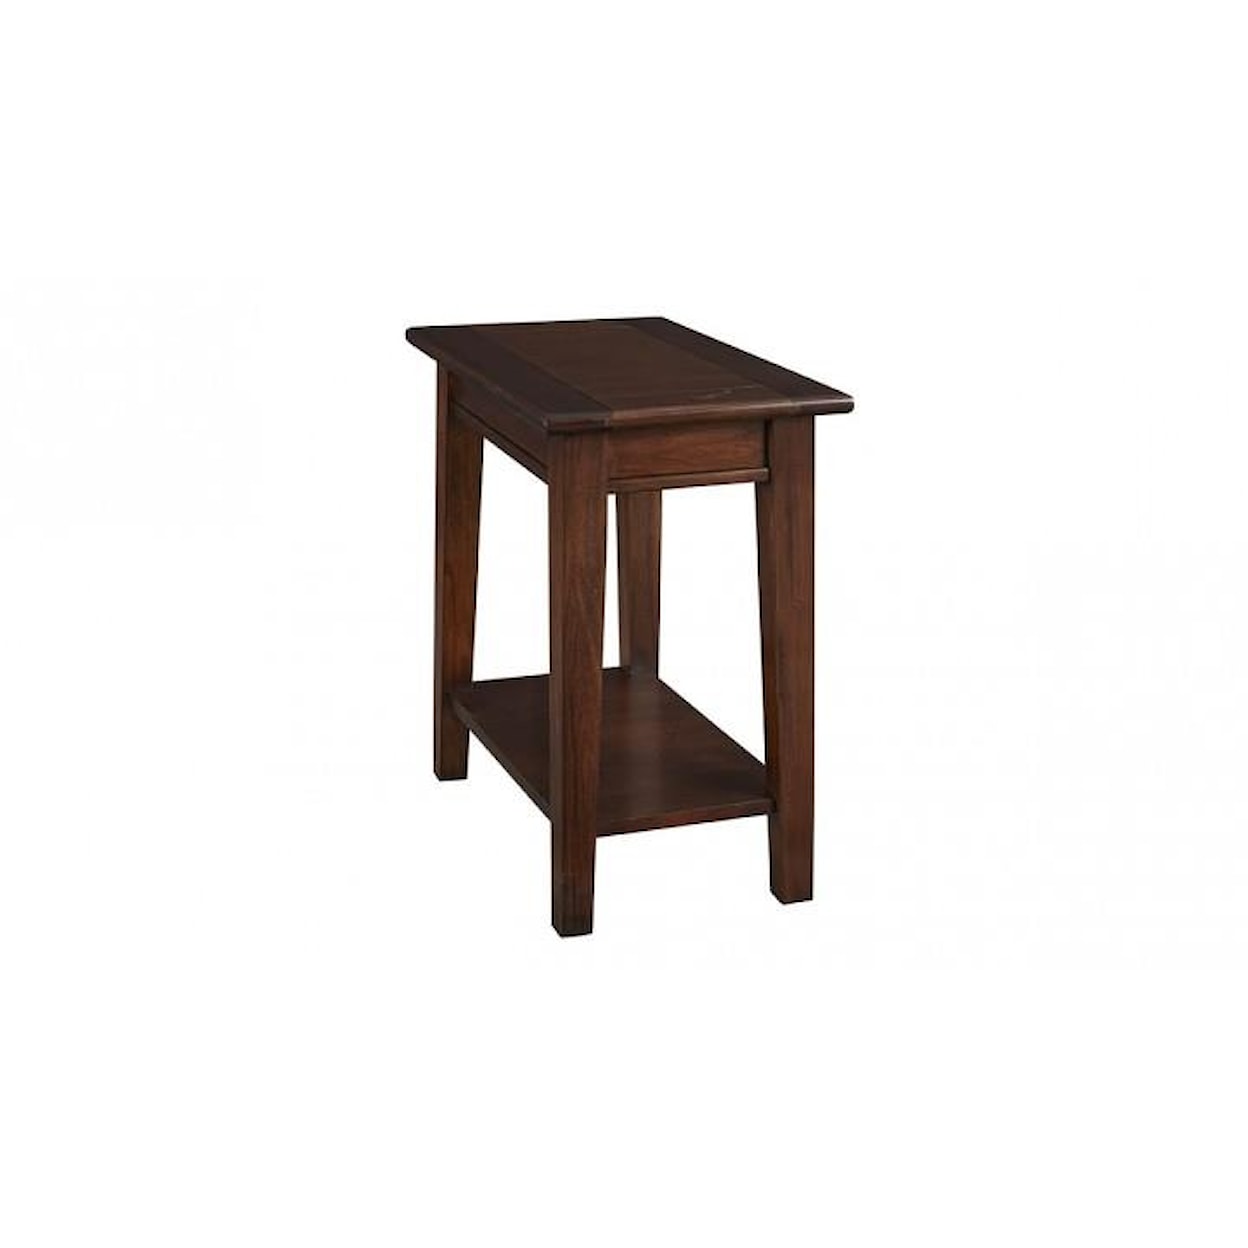 A-A Westlake Chairside Table